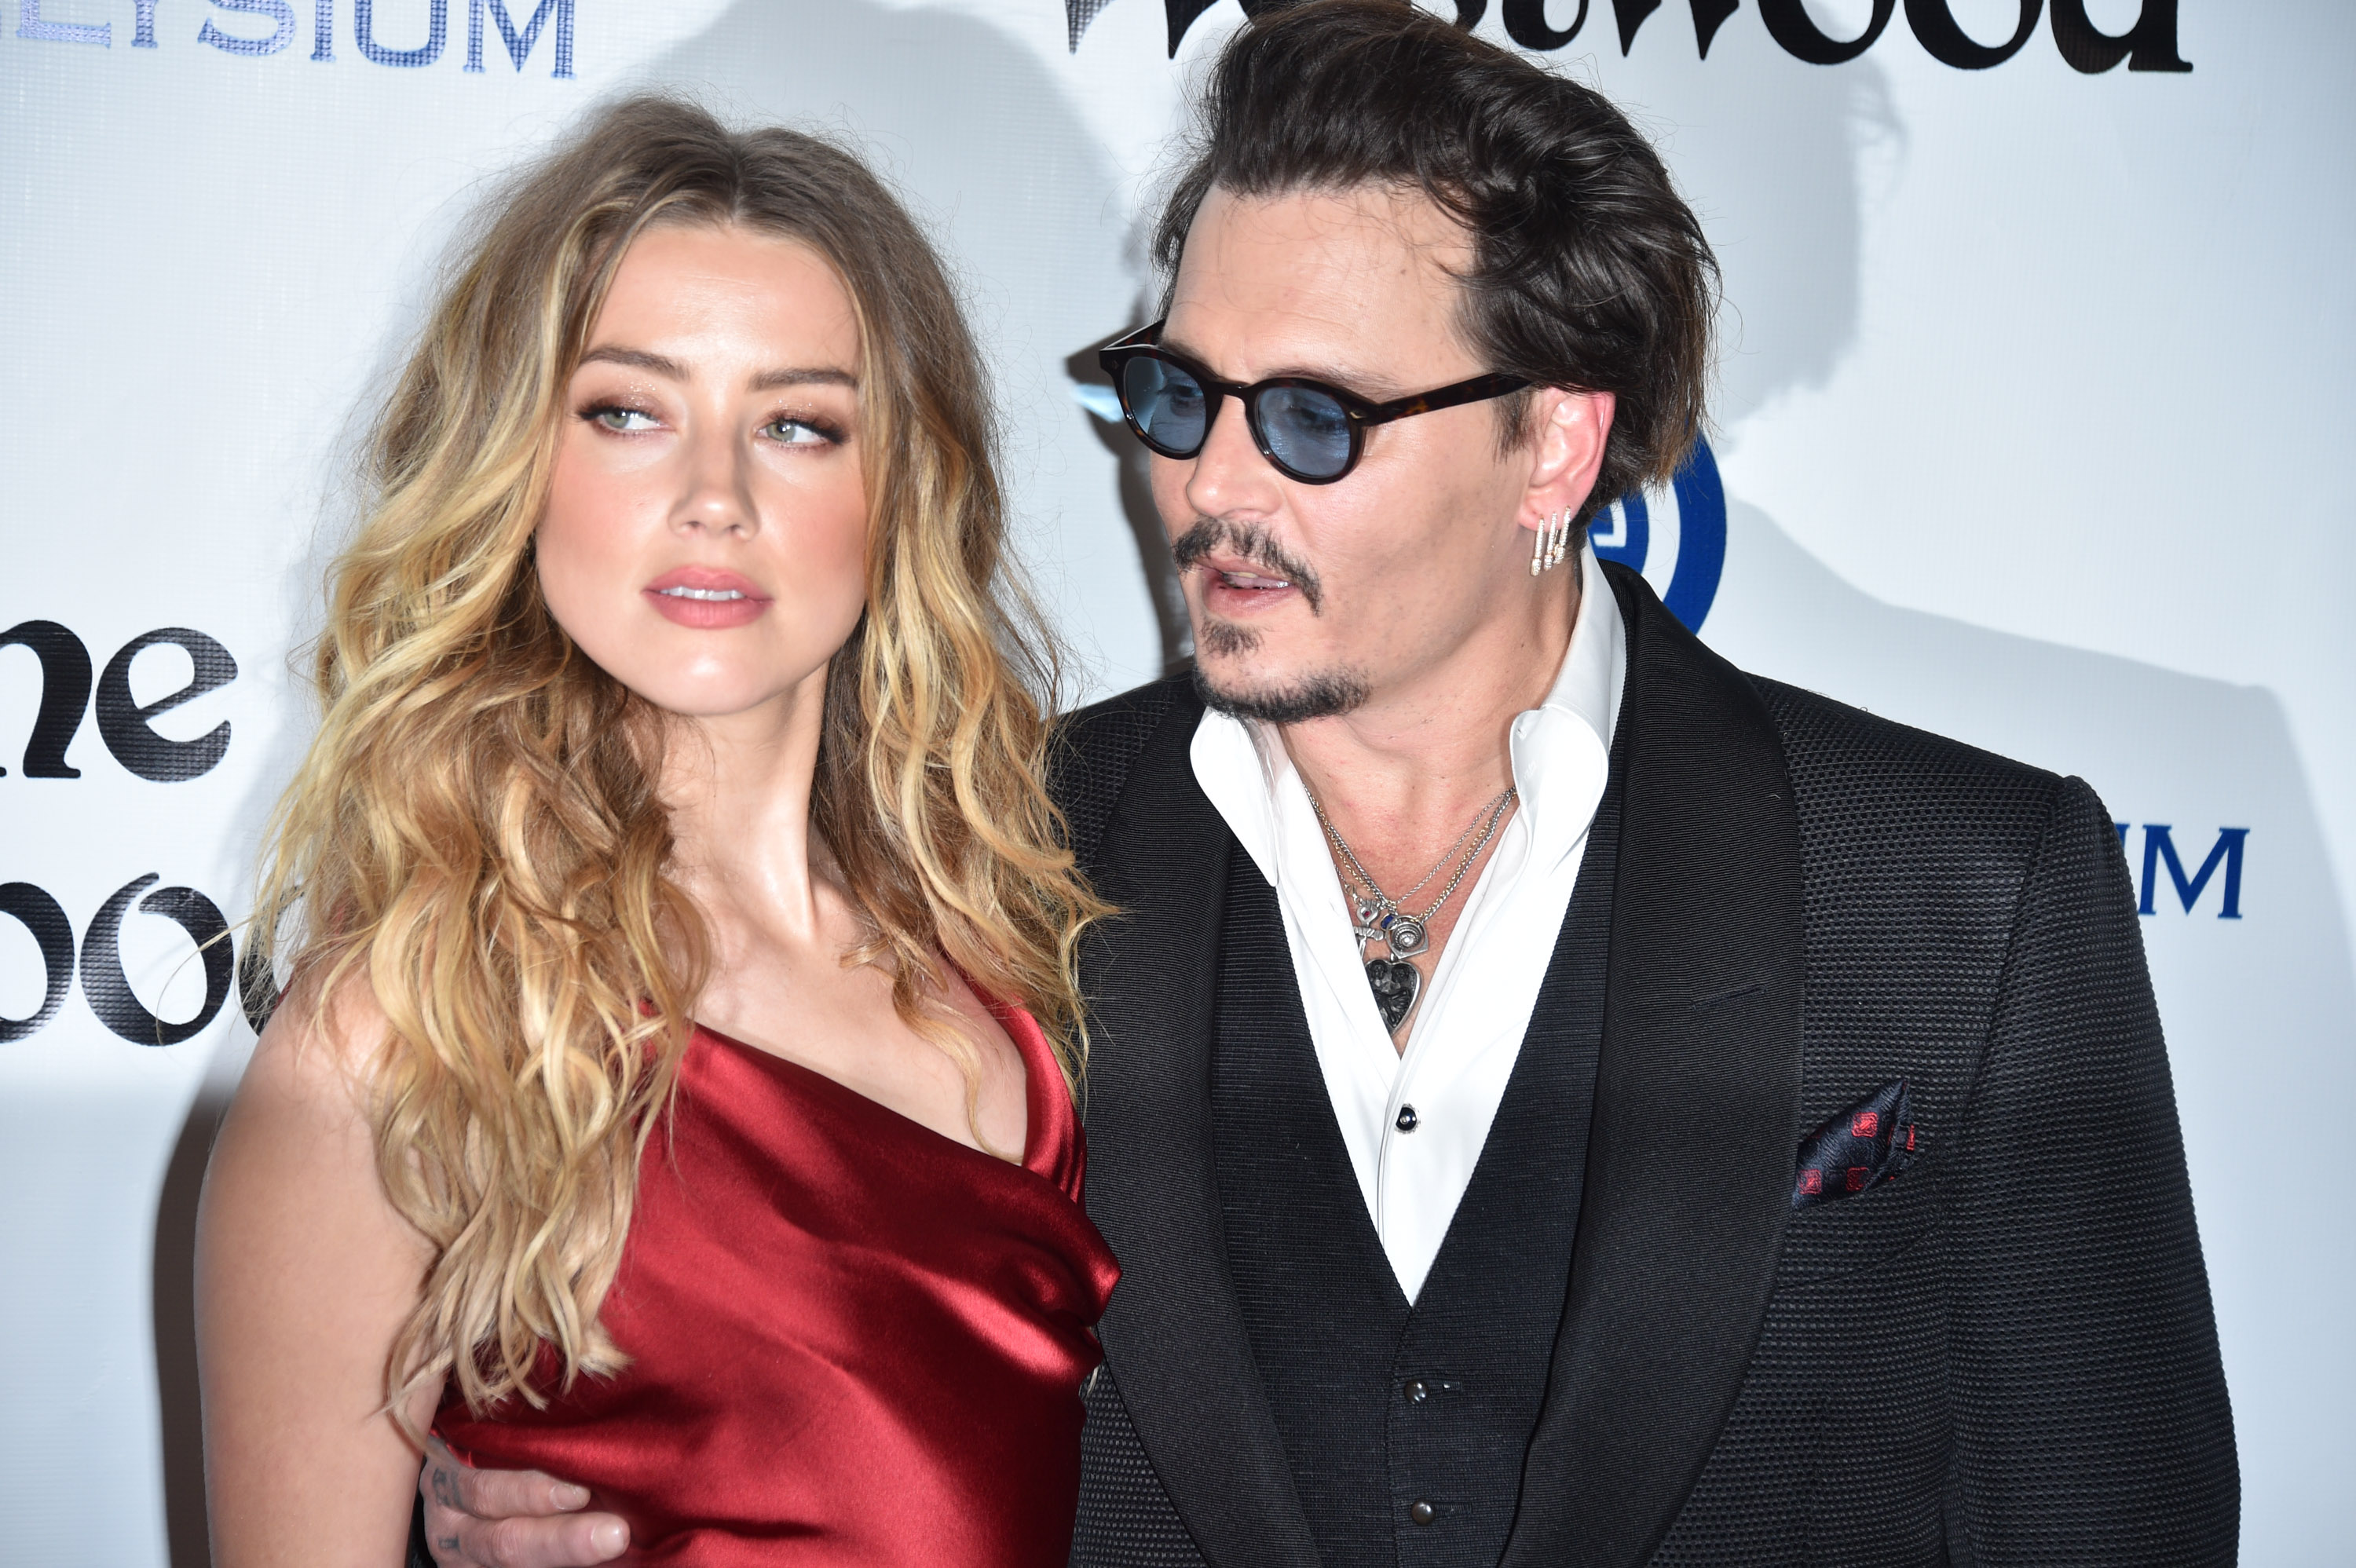 CULVER CITY, CA - JANUARY 09:  Amber Heard and Johnny Depp attend the Art of Elysium 2016 HEAVEN Gala presented by Vivienne Westwood &amp; Andreas Kronthaler at 3LABS on January 9, 2016 in Culver City, California.  (Photo by George Pimentel/WireImage) (George Pimentel—WireImage)